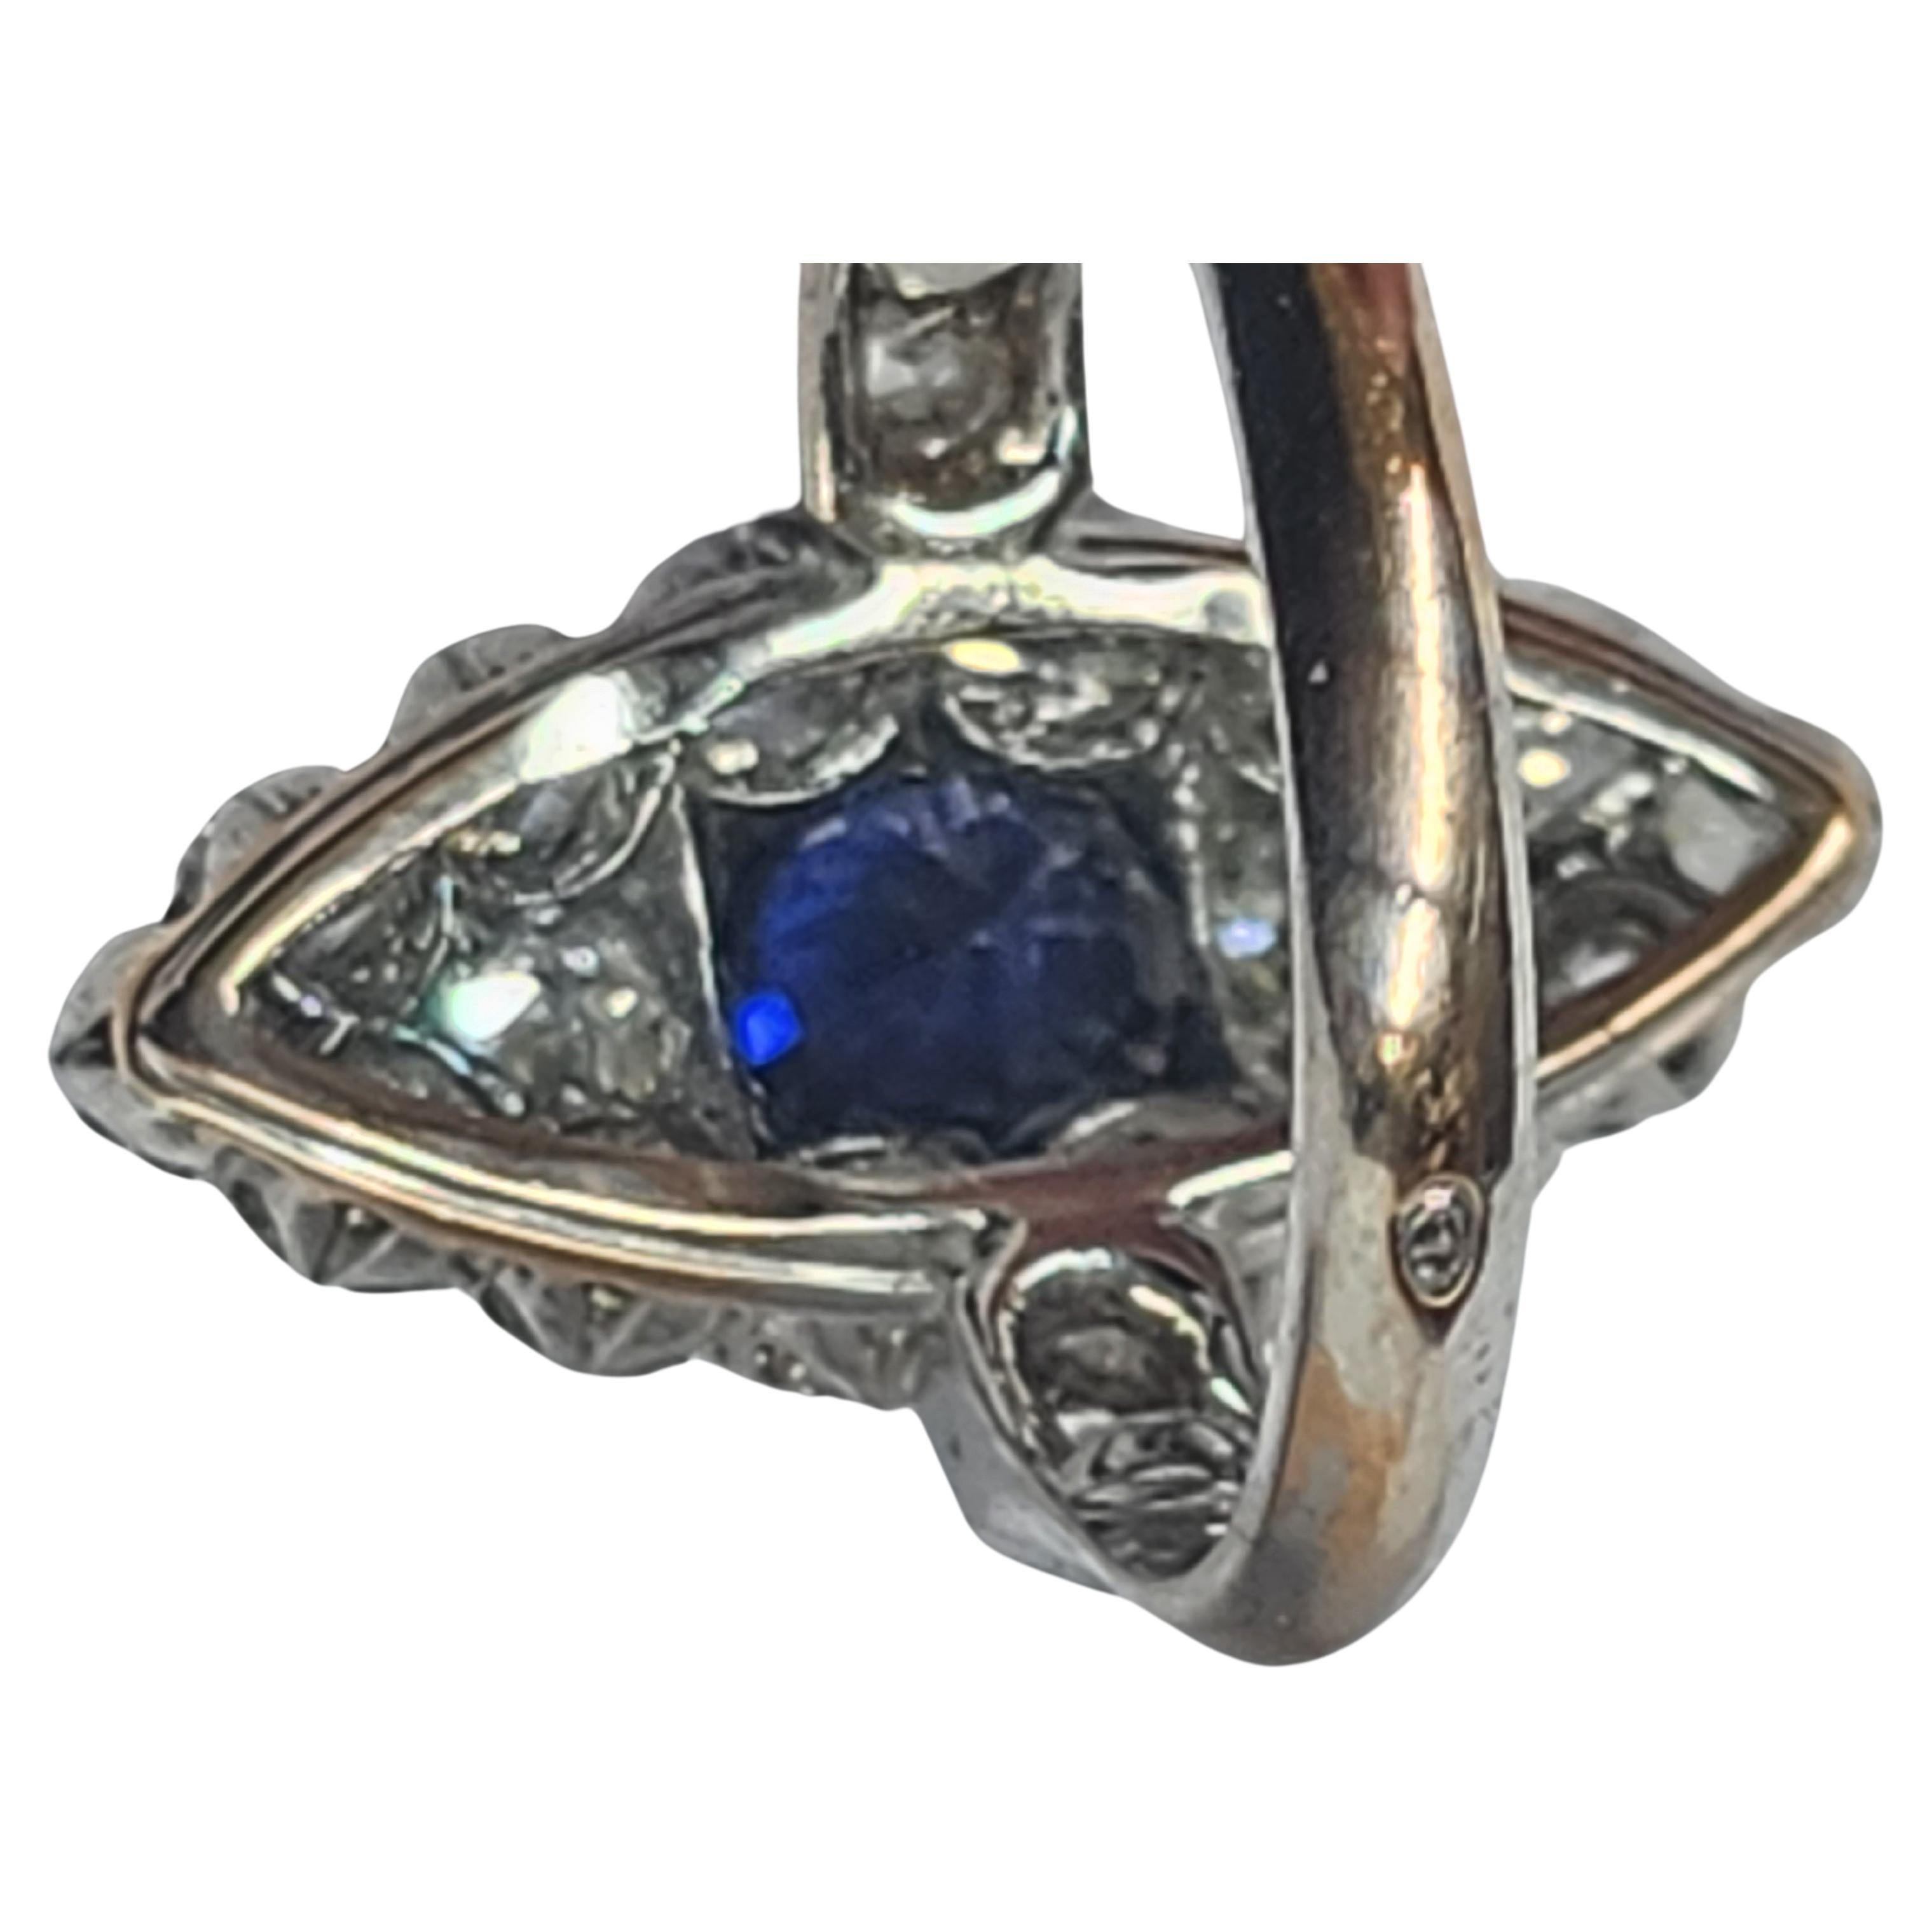 Antique old mine cut diamond ring with an estimate weight of 1.5 carats H/I color excellent cut and spark centered with blue sapphire stone ring is hall marked with french owl import mark for 18k gold 1902s ring head diameter 20mm 